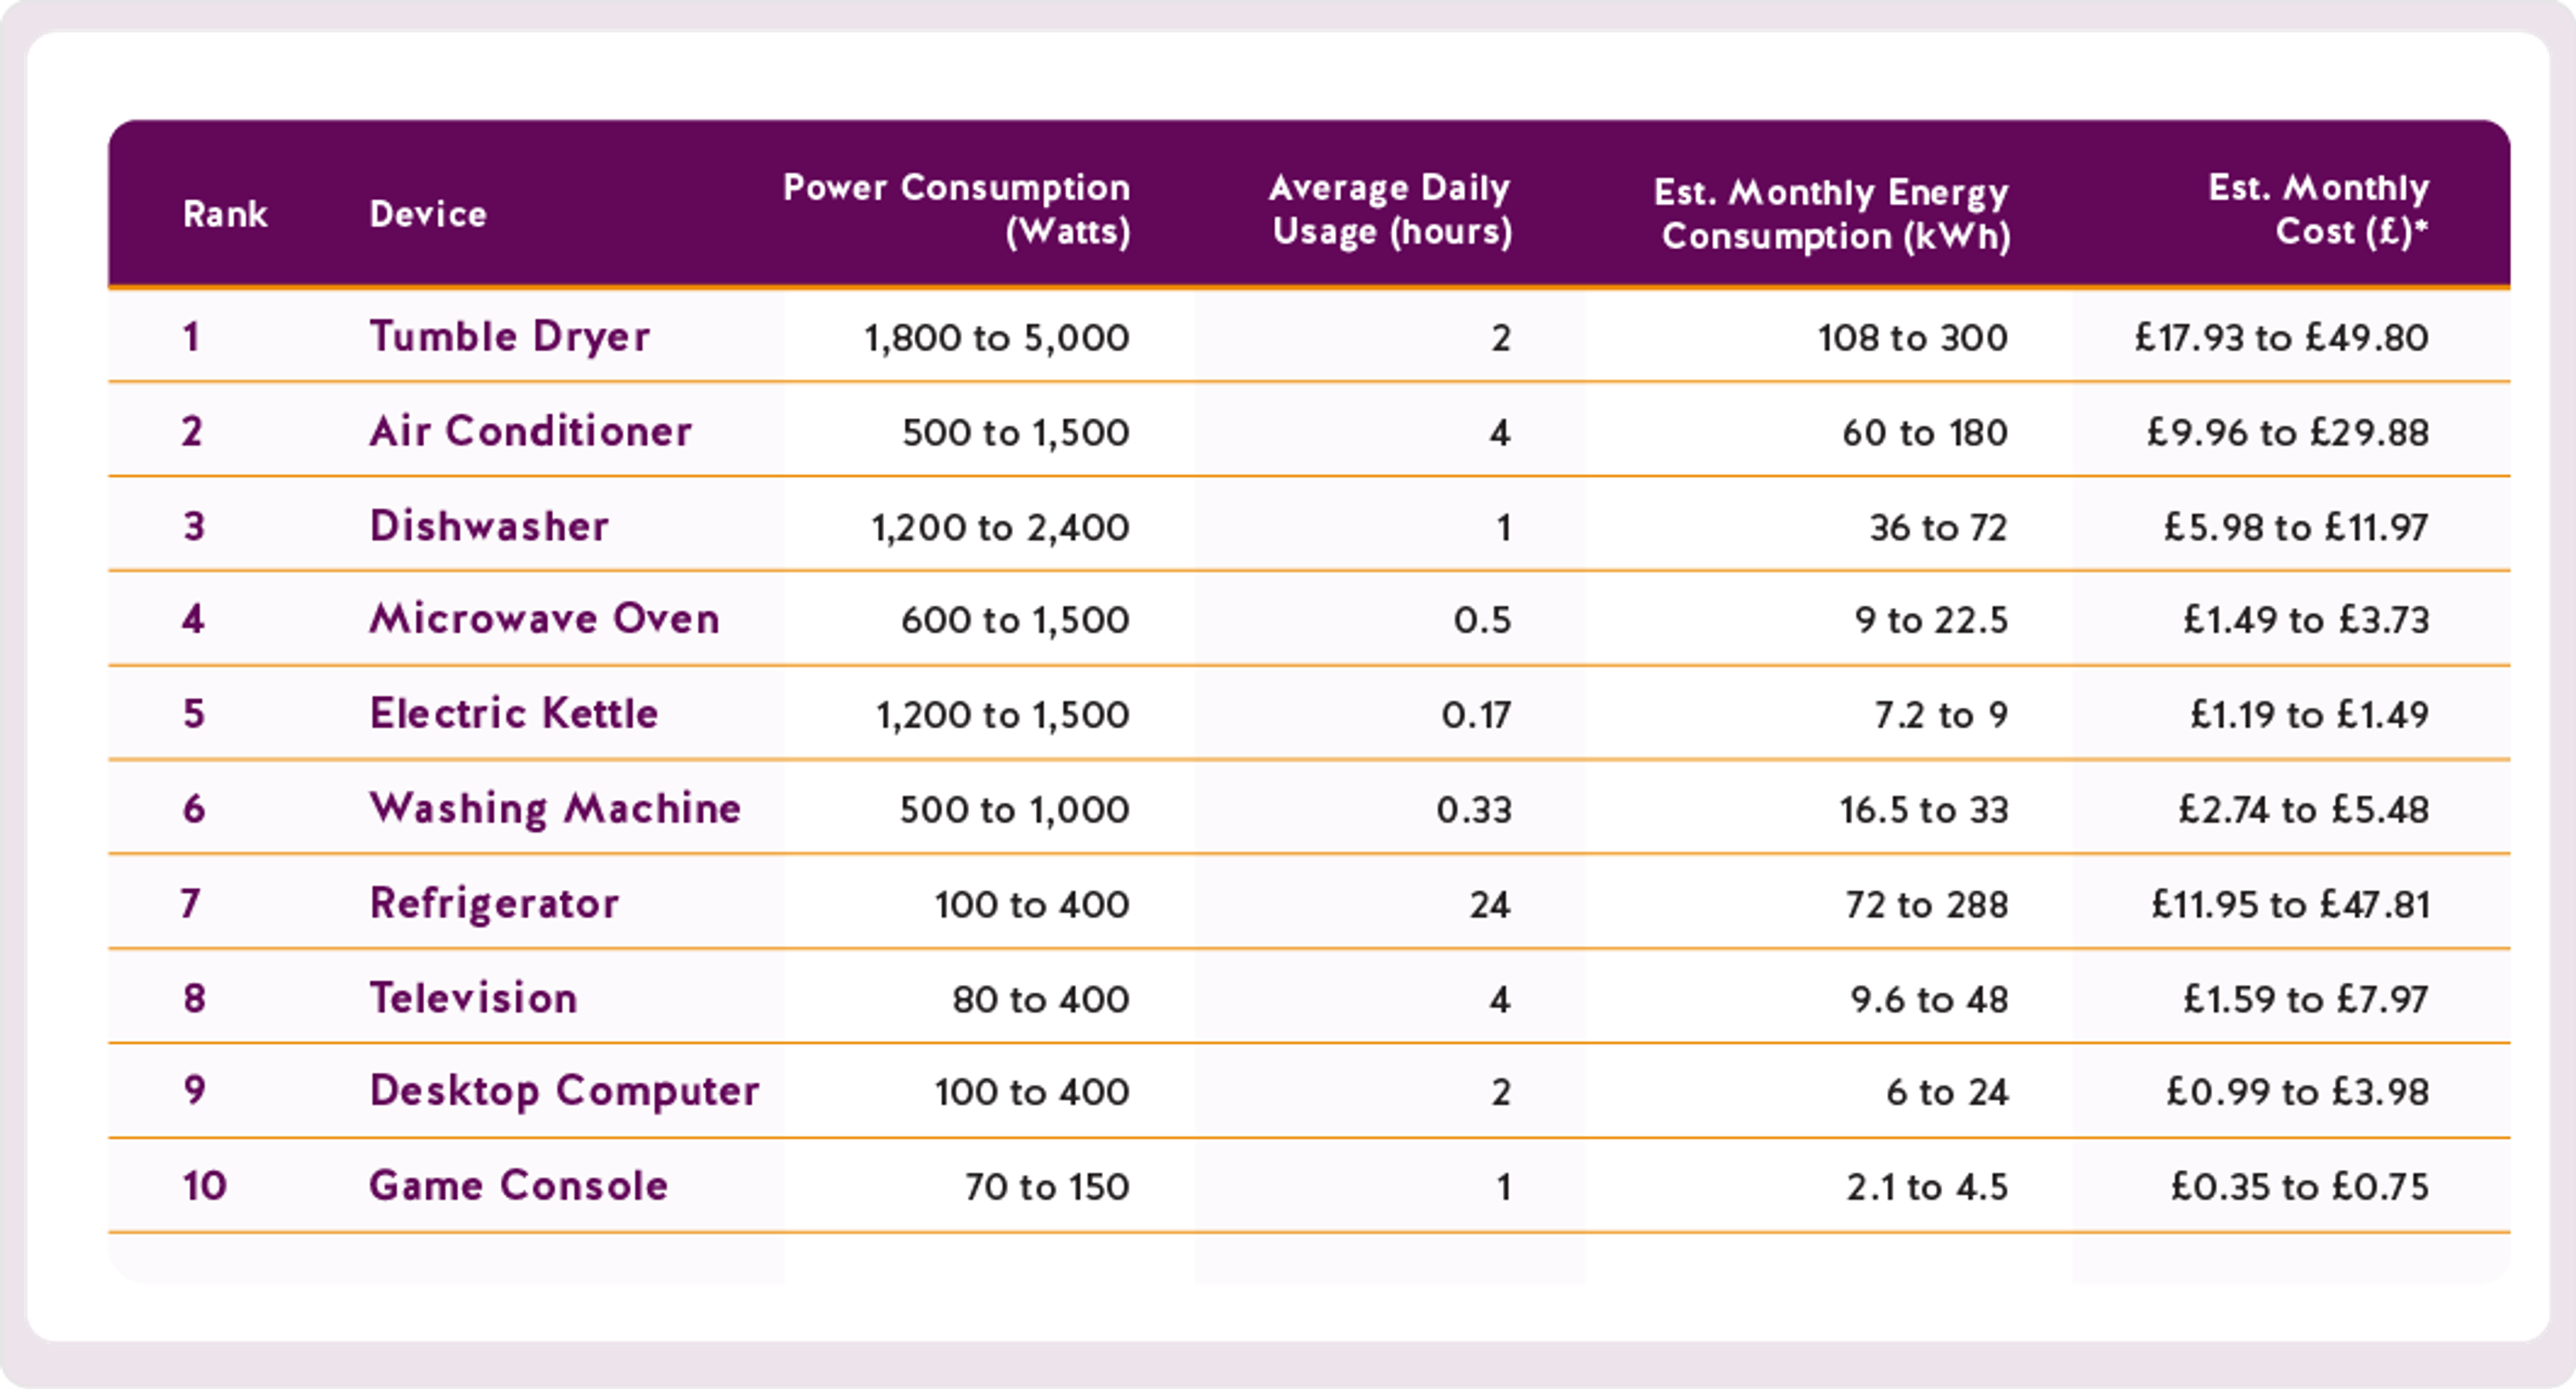 A table showing home devices energy consumption